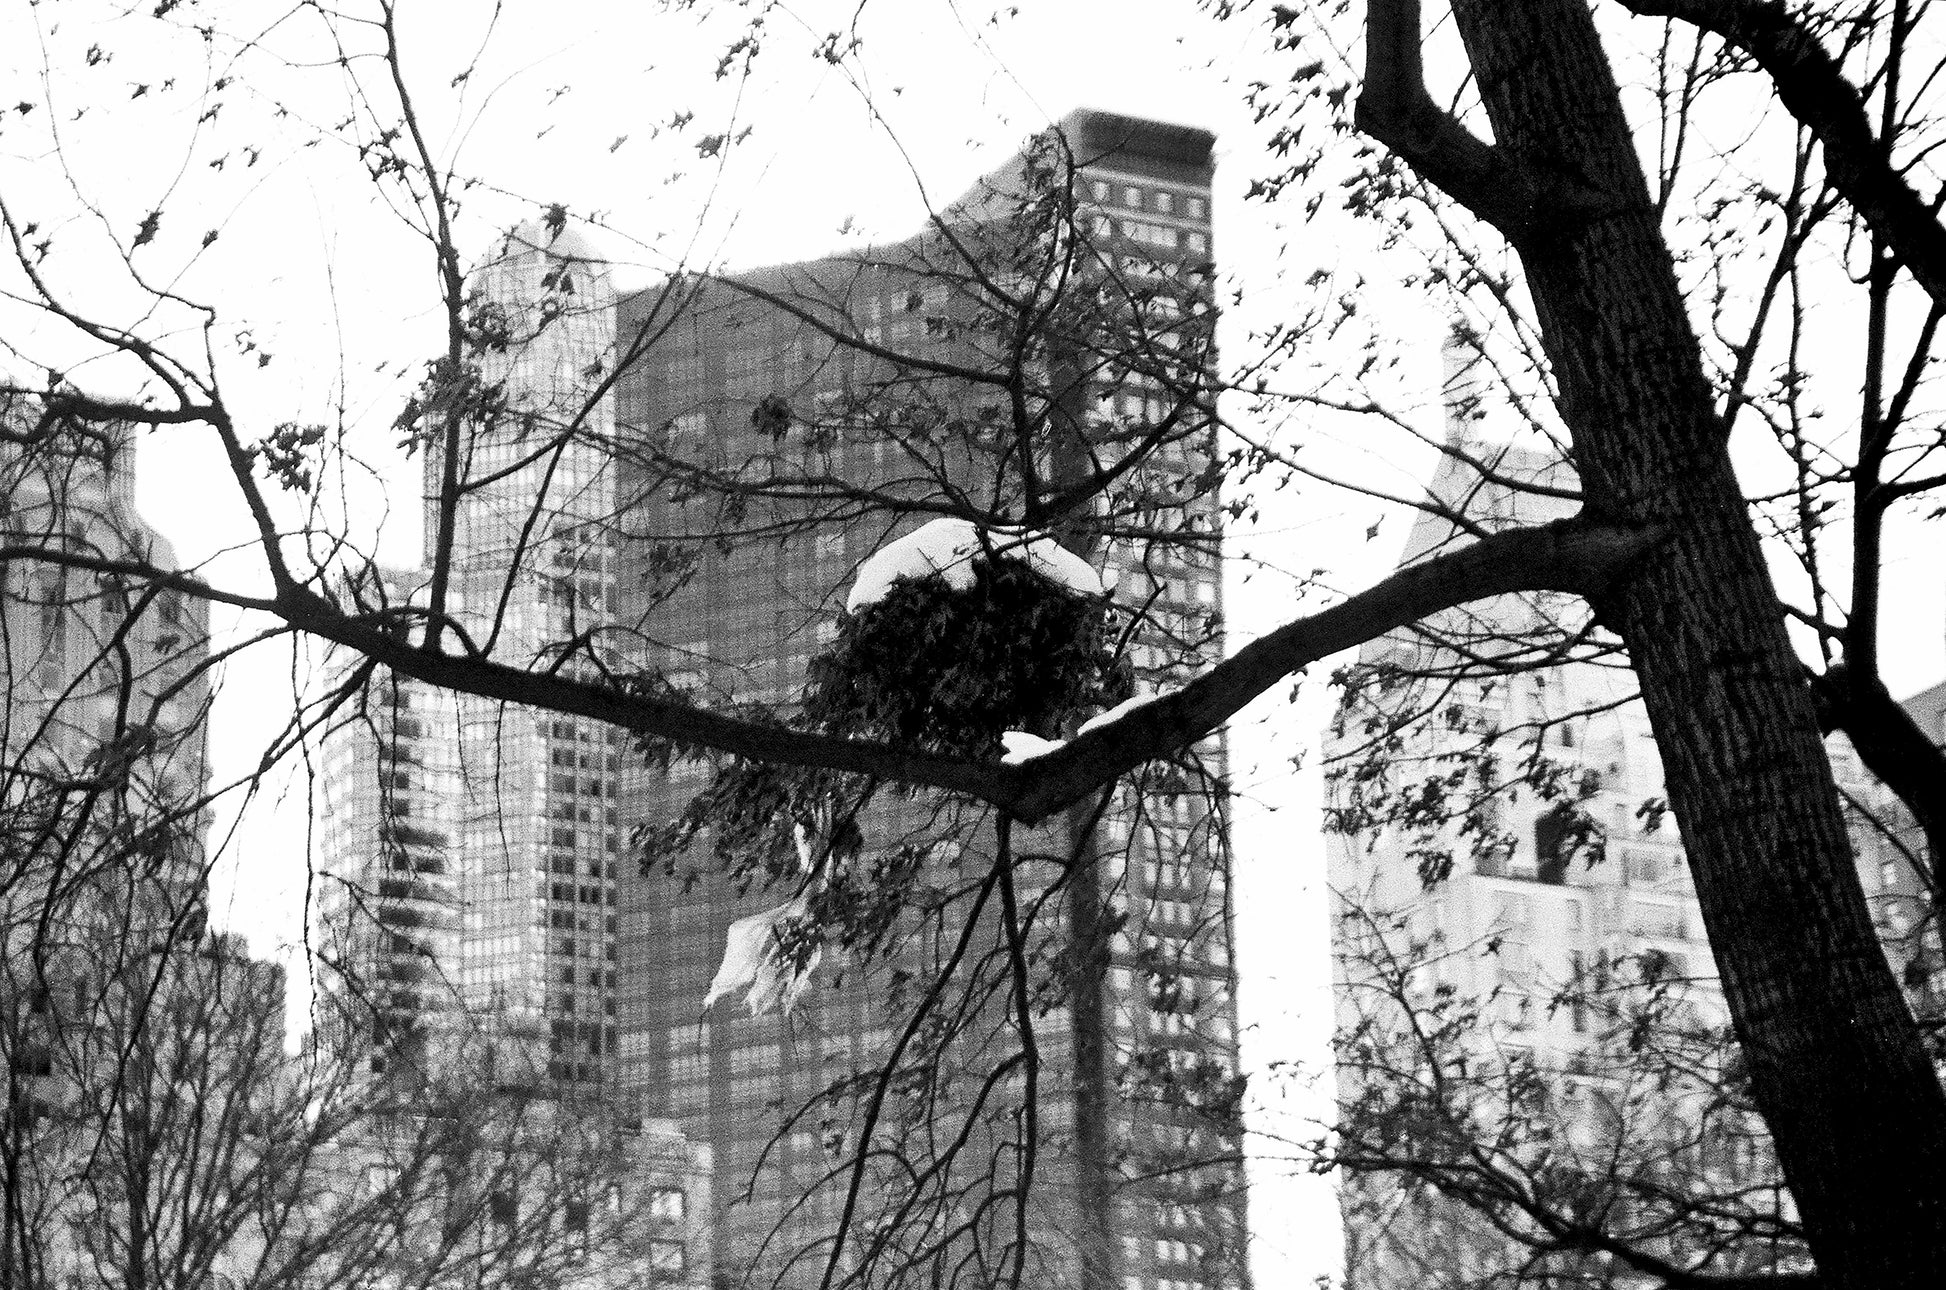 Alessandra Mattanza | ISOLATED, Central Park, New York. The city peeks through the winter gloom in Central Park. Available as a photographic print on acrylic glass.